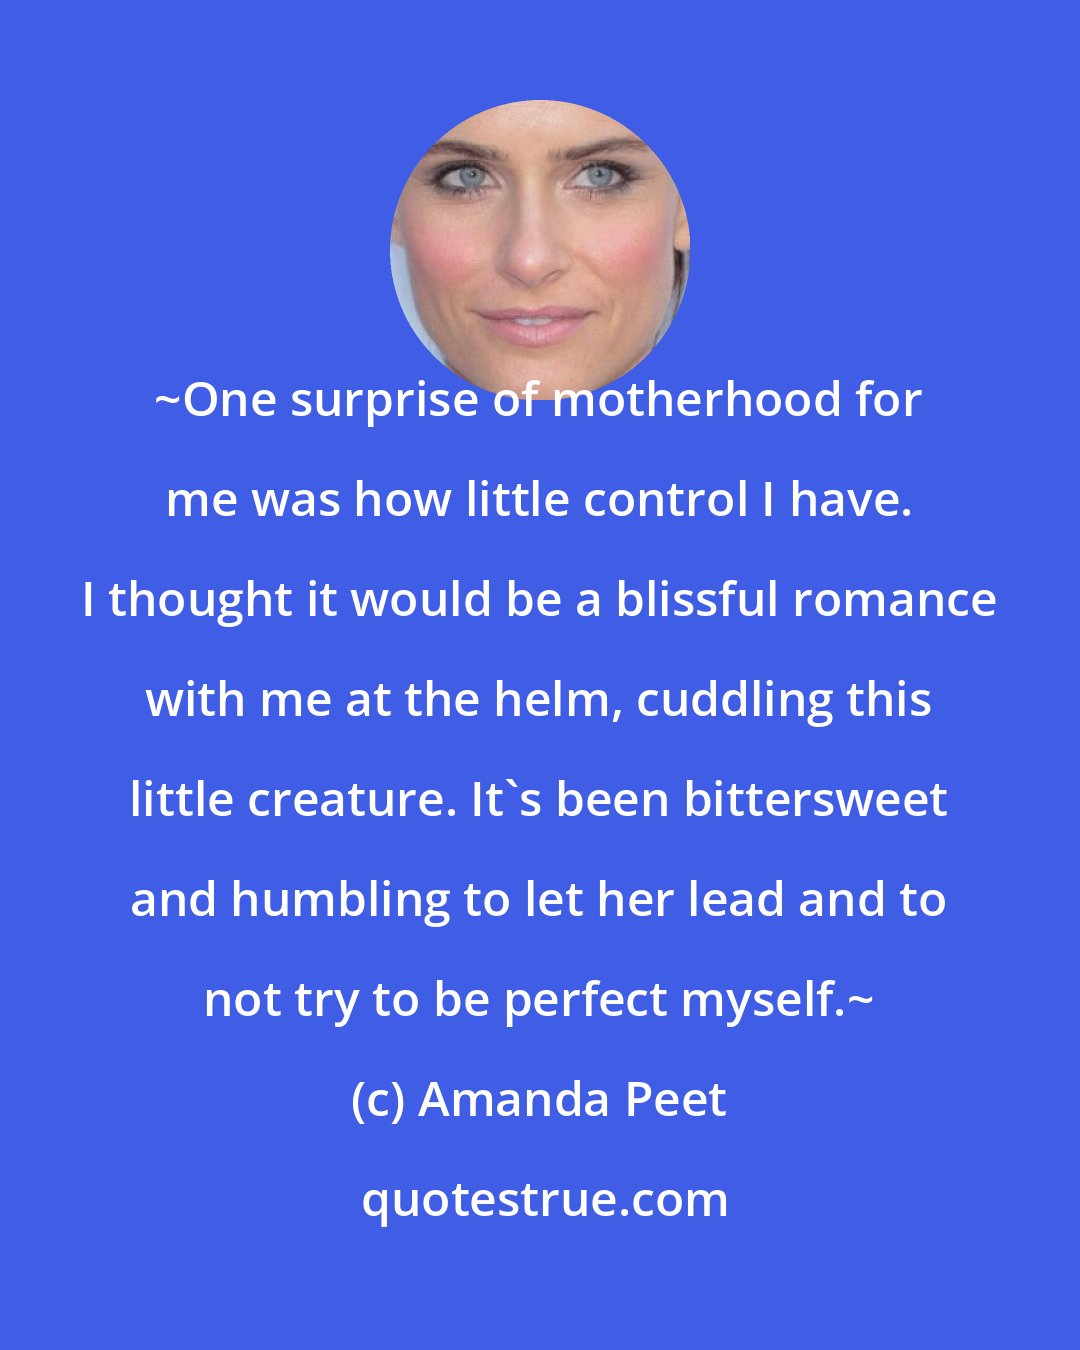 Amanda Peet: ~One surprise of motherhood for me was how little control I have. I thought it would be a blissful romance with me at the helm, cuddling this little creature. It's been bittersweet and humbling to let her lead and to not try to be perfect myself.~